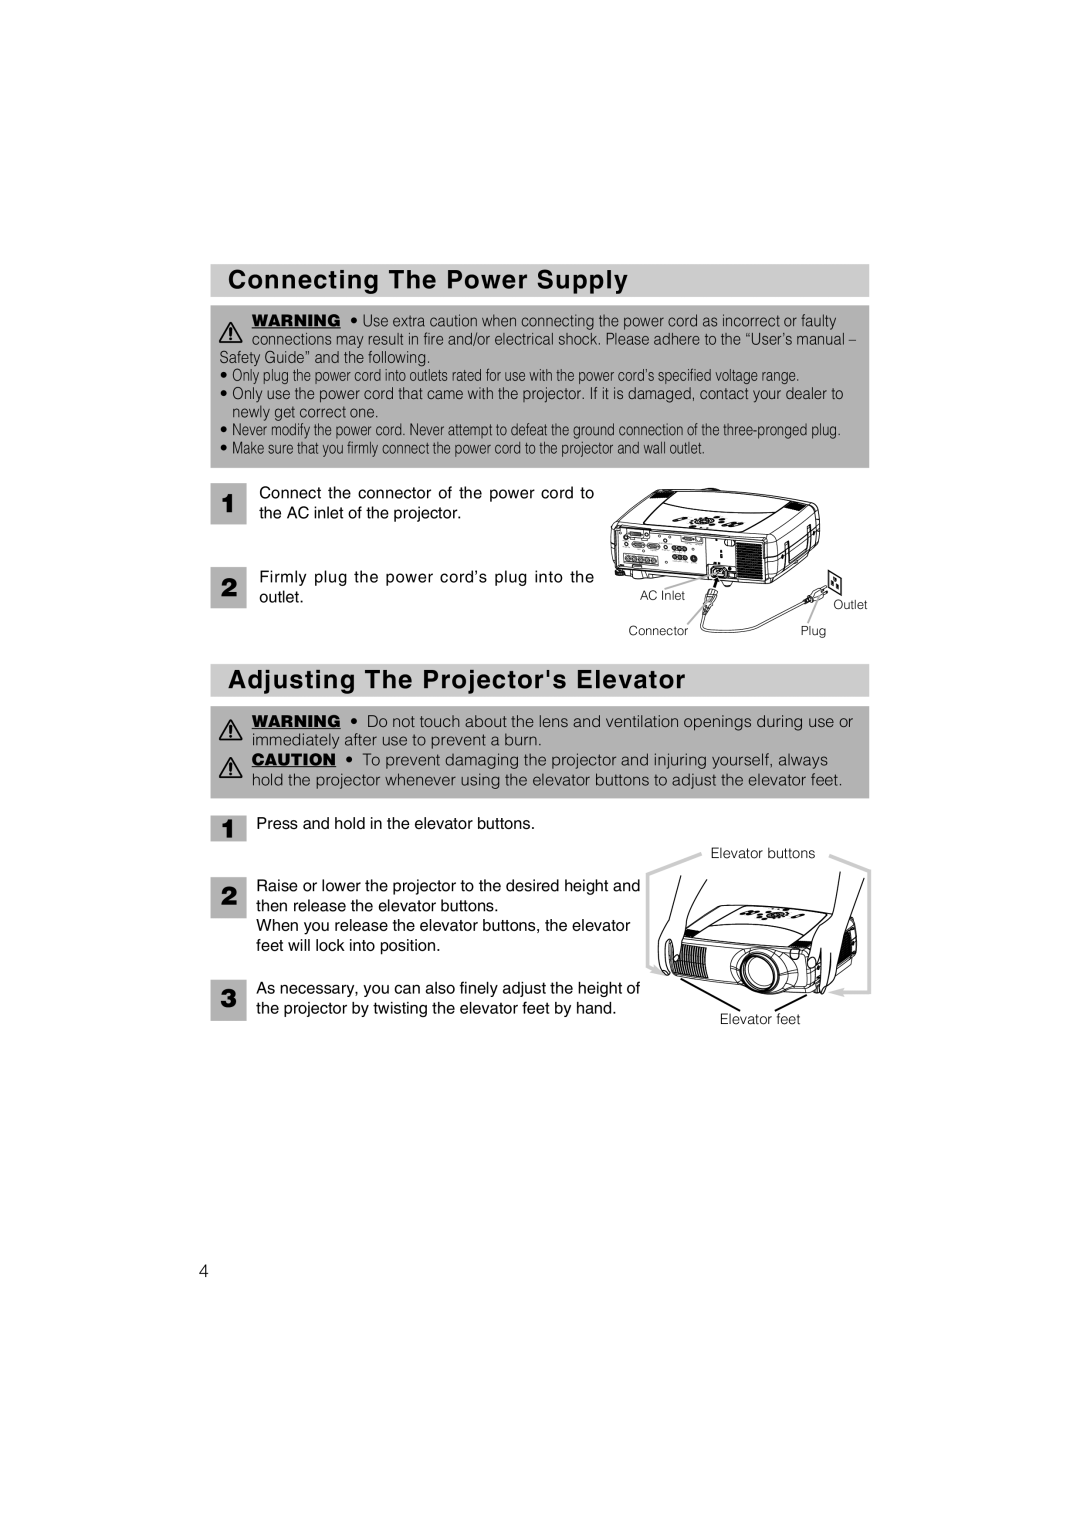 Hitachi CP-X1250 user manual Connecting The Power Supply, Adjusting The Projectors Elevator 